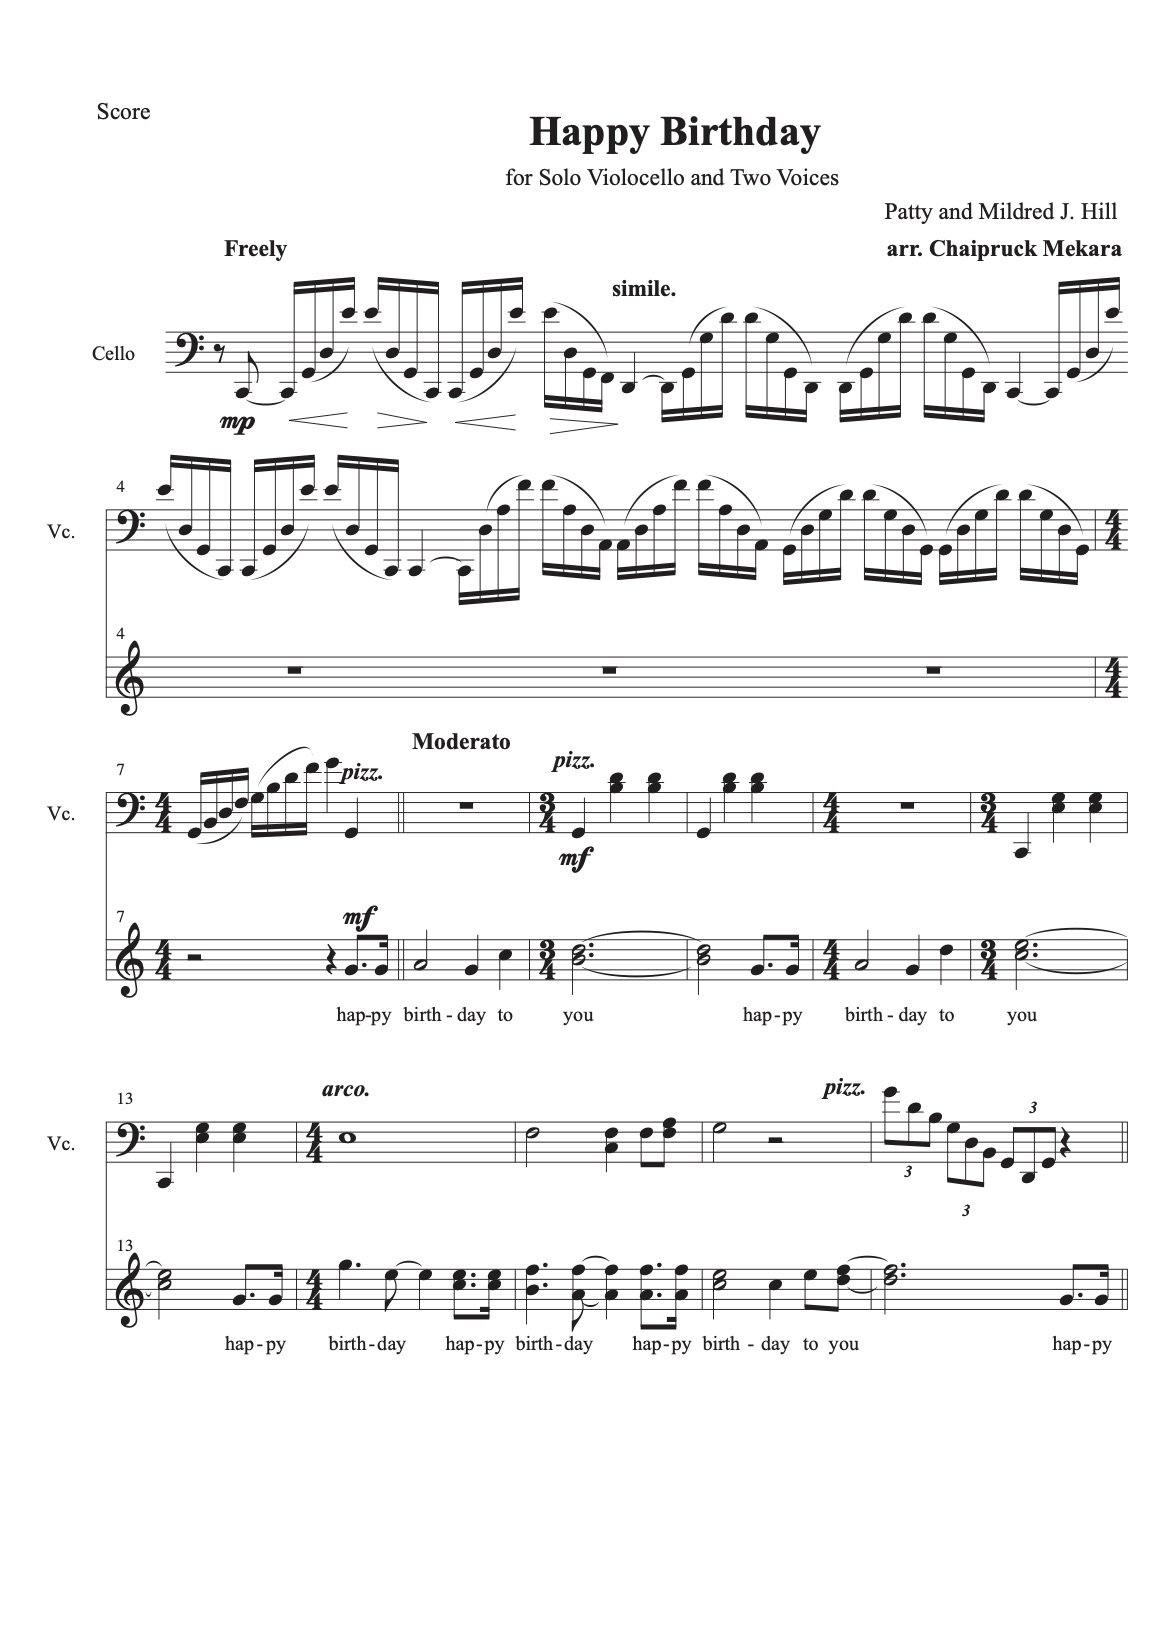 Happy Birthday to You - Solo Violoncello and Two Voices (score+part) - ChaipruckMekara